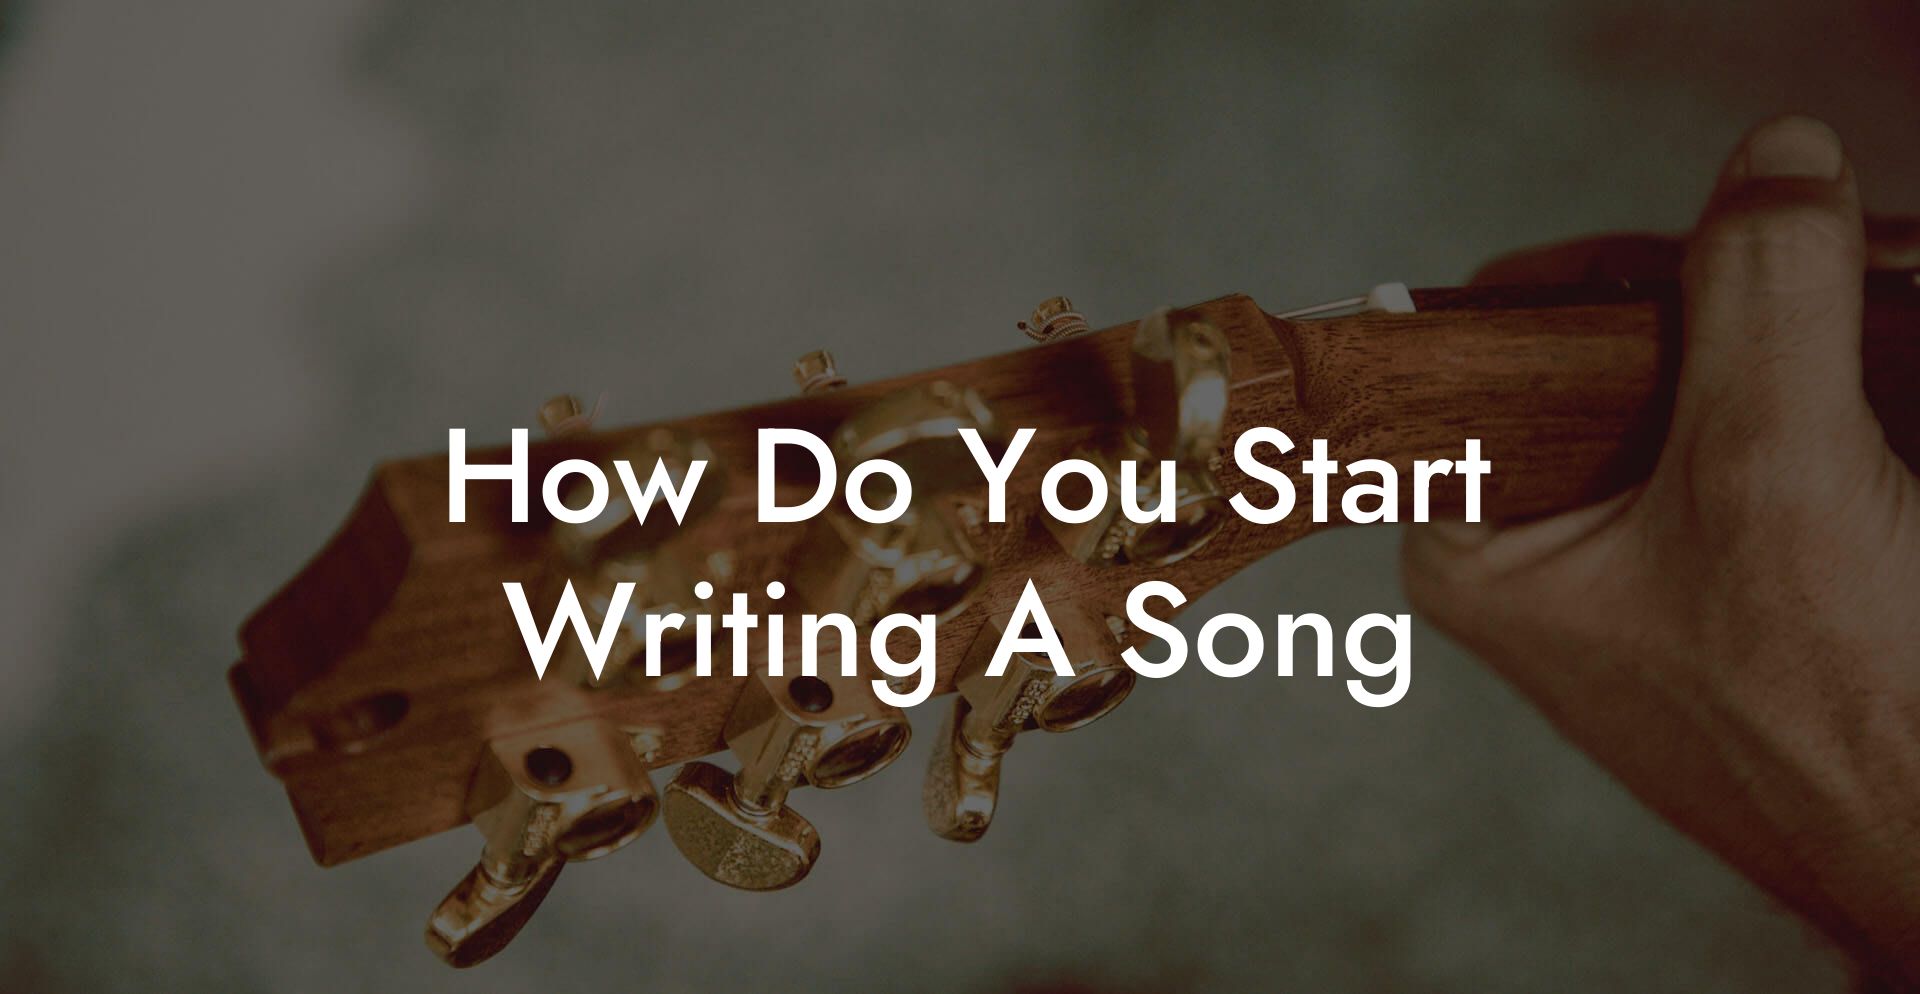 how do you start writing a song lyric assistant